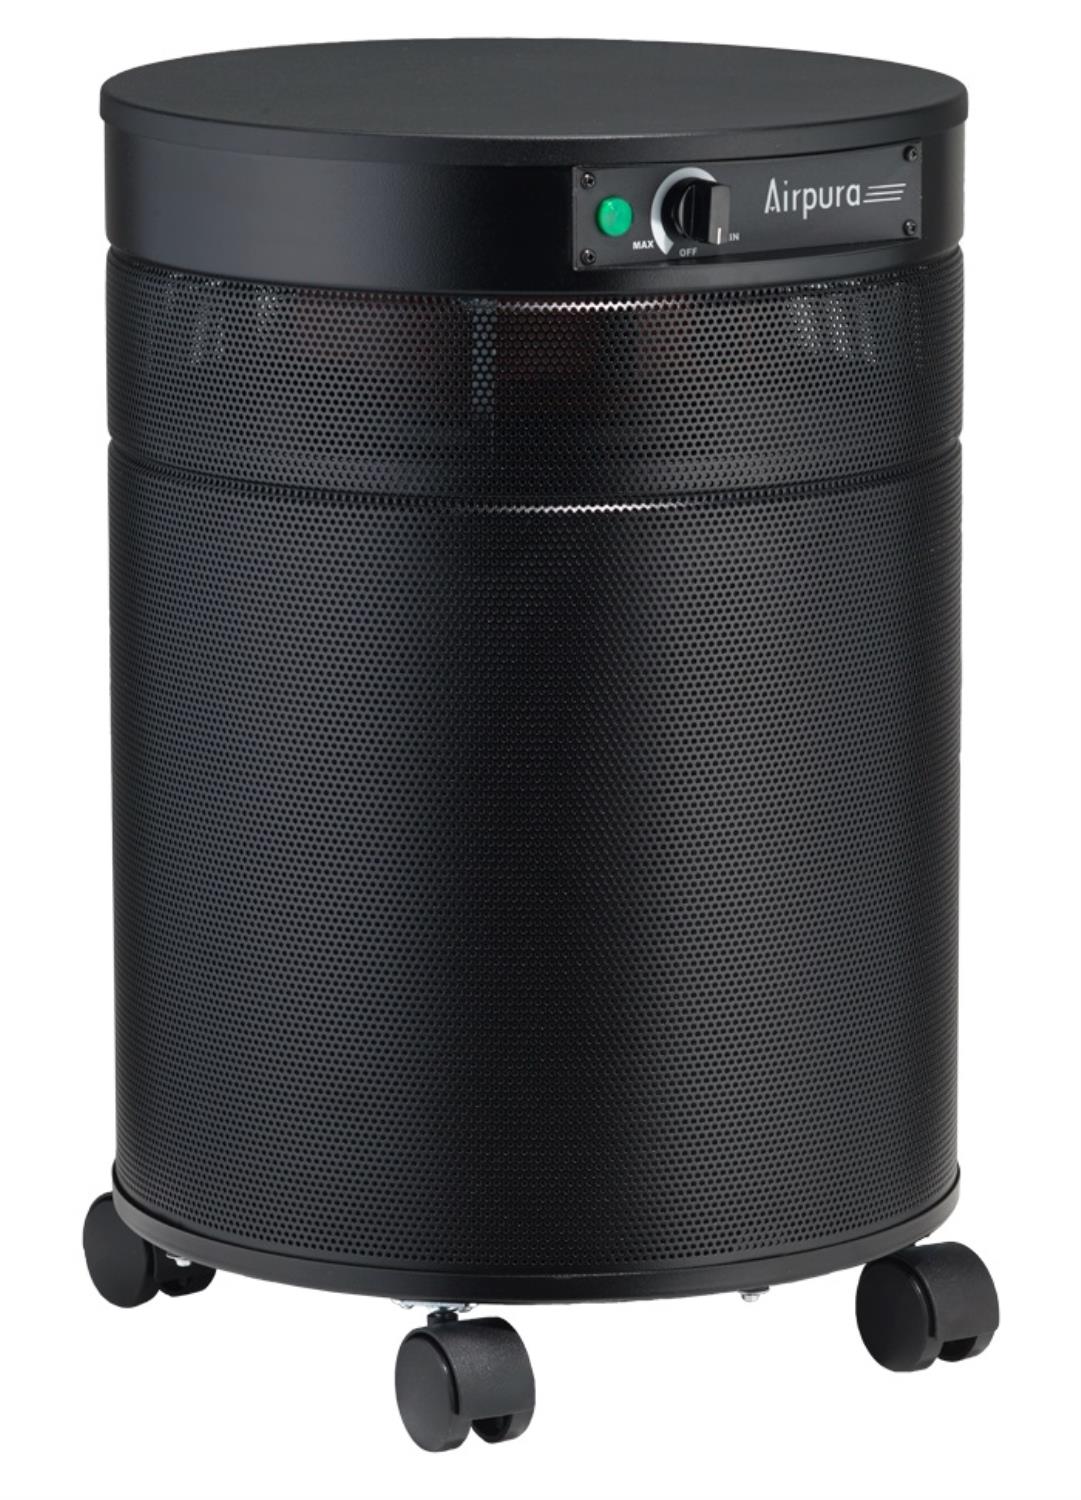 Airpura Powdered Coated Galvanized Metal Air Purifier in Black Finish V614-BLK